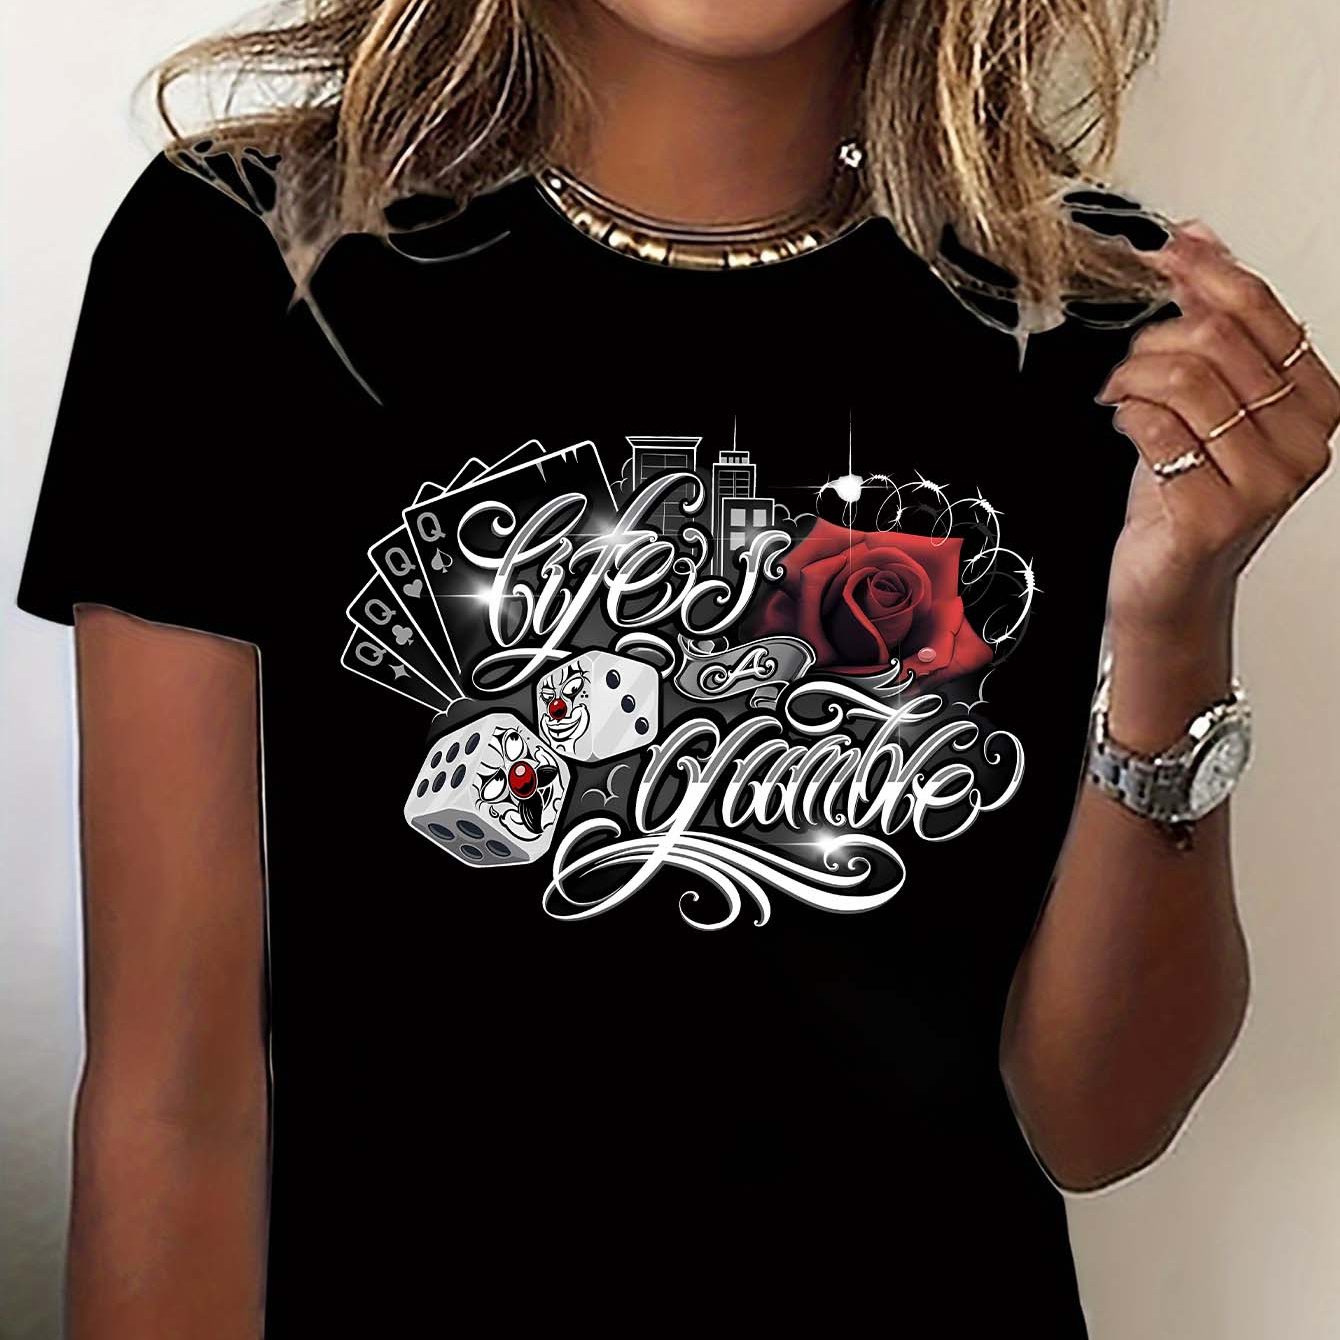 

Women's Casual Sporty T-shirt, "lucky Gambler" Dice & Roses Print, Comfort Fit Short Sleeve Tee, Fashion Breathable Casual Top